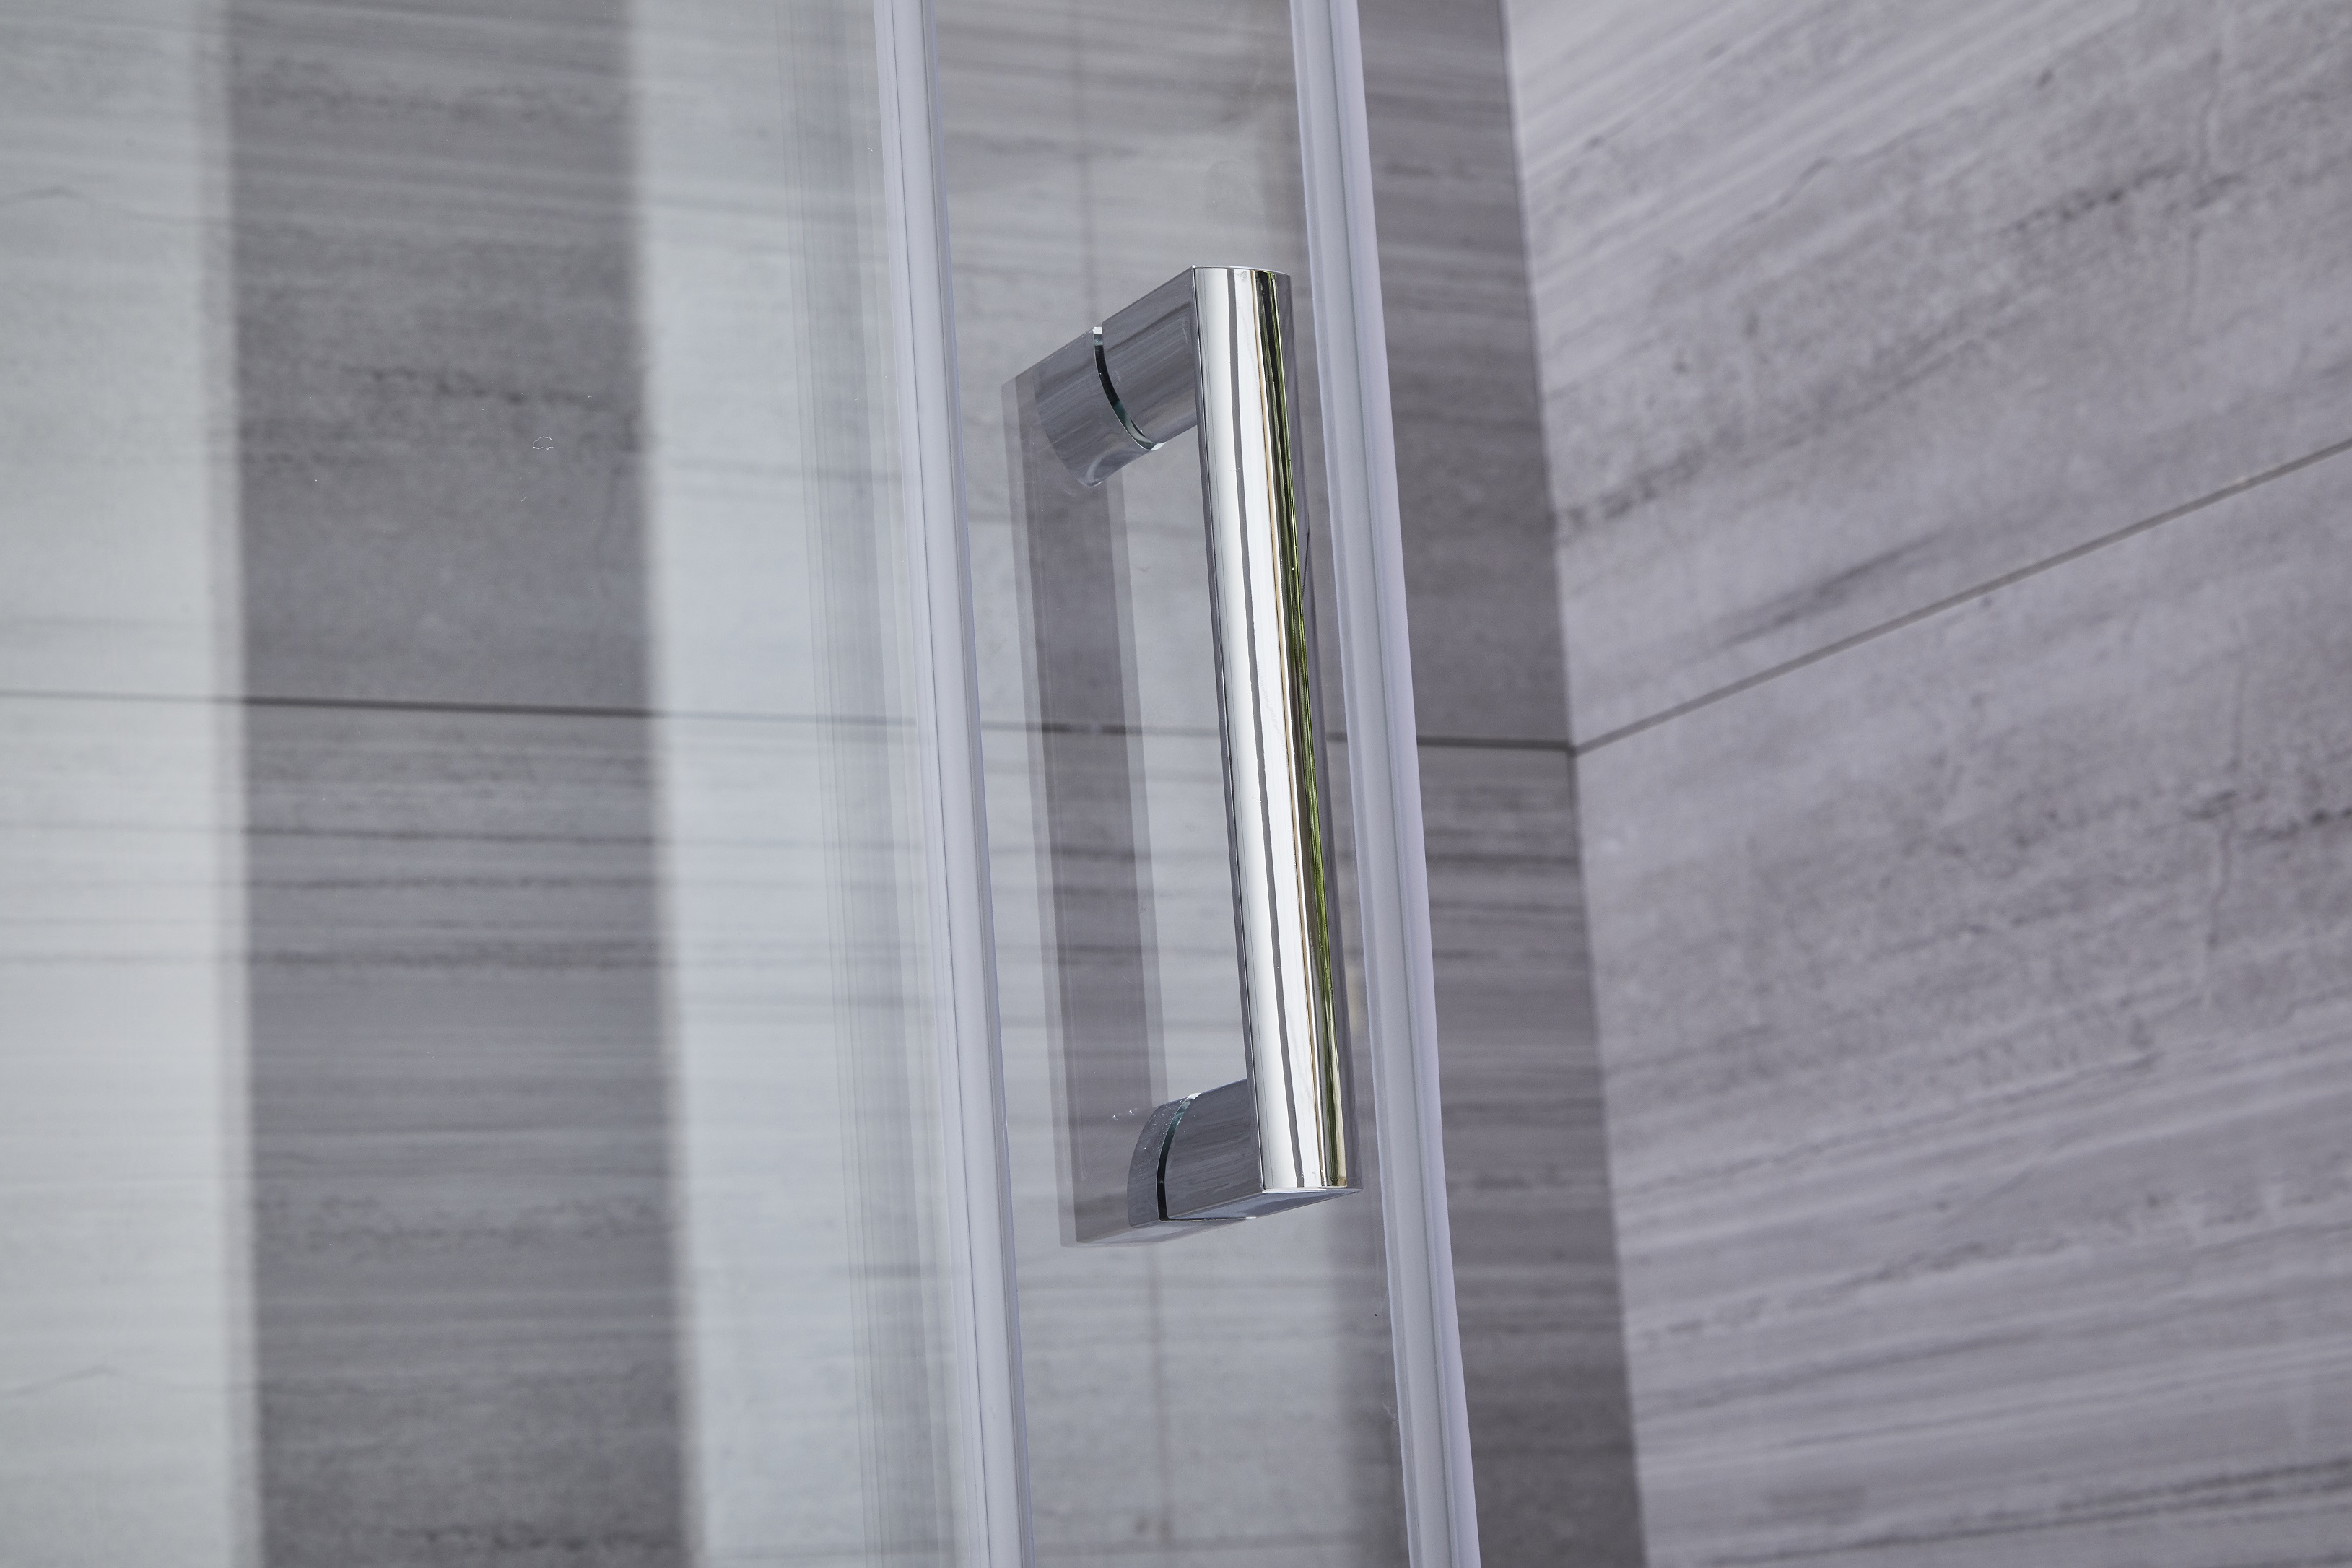 2020 New Bathroom Shower Panels Walk in Door Style Transparency Clearly Glass with Chrome Aluminum Frame